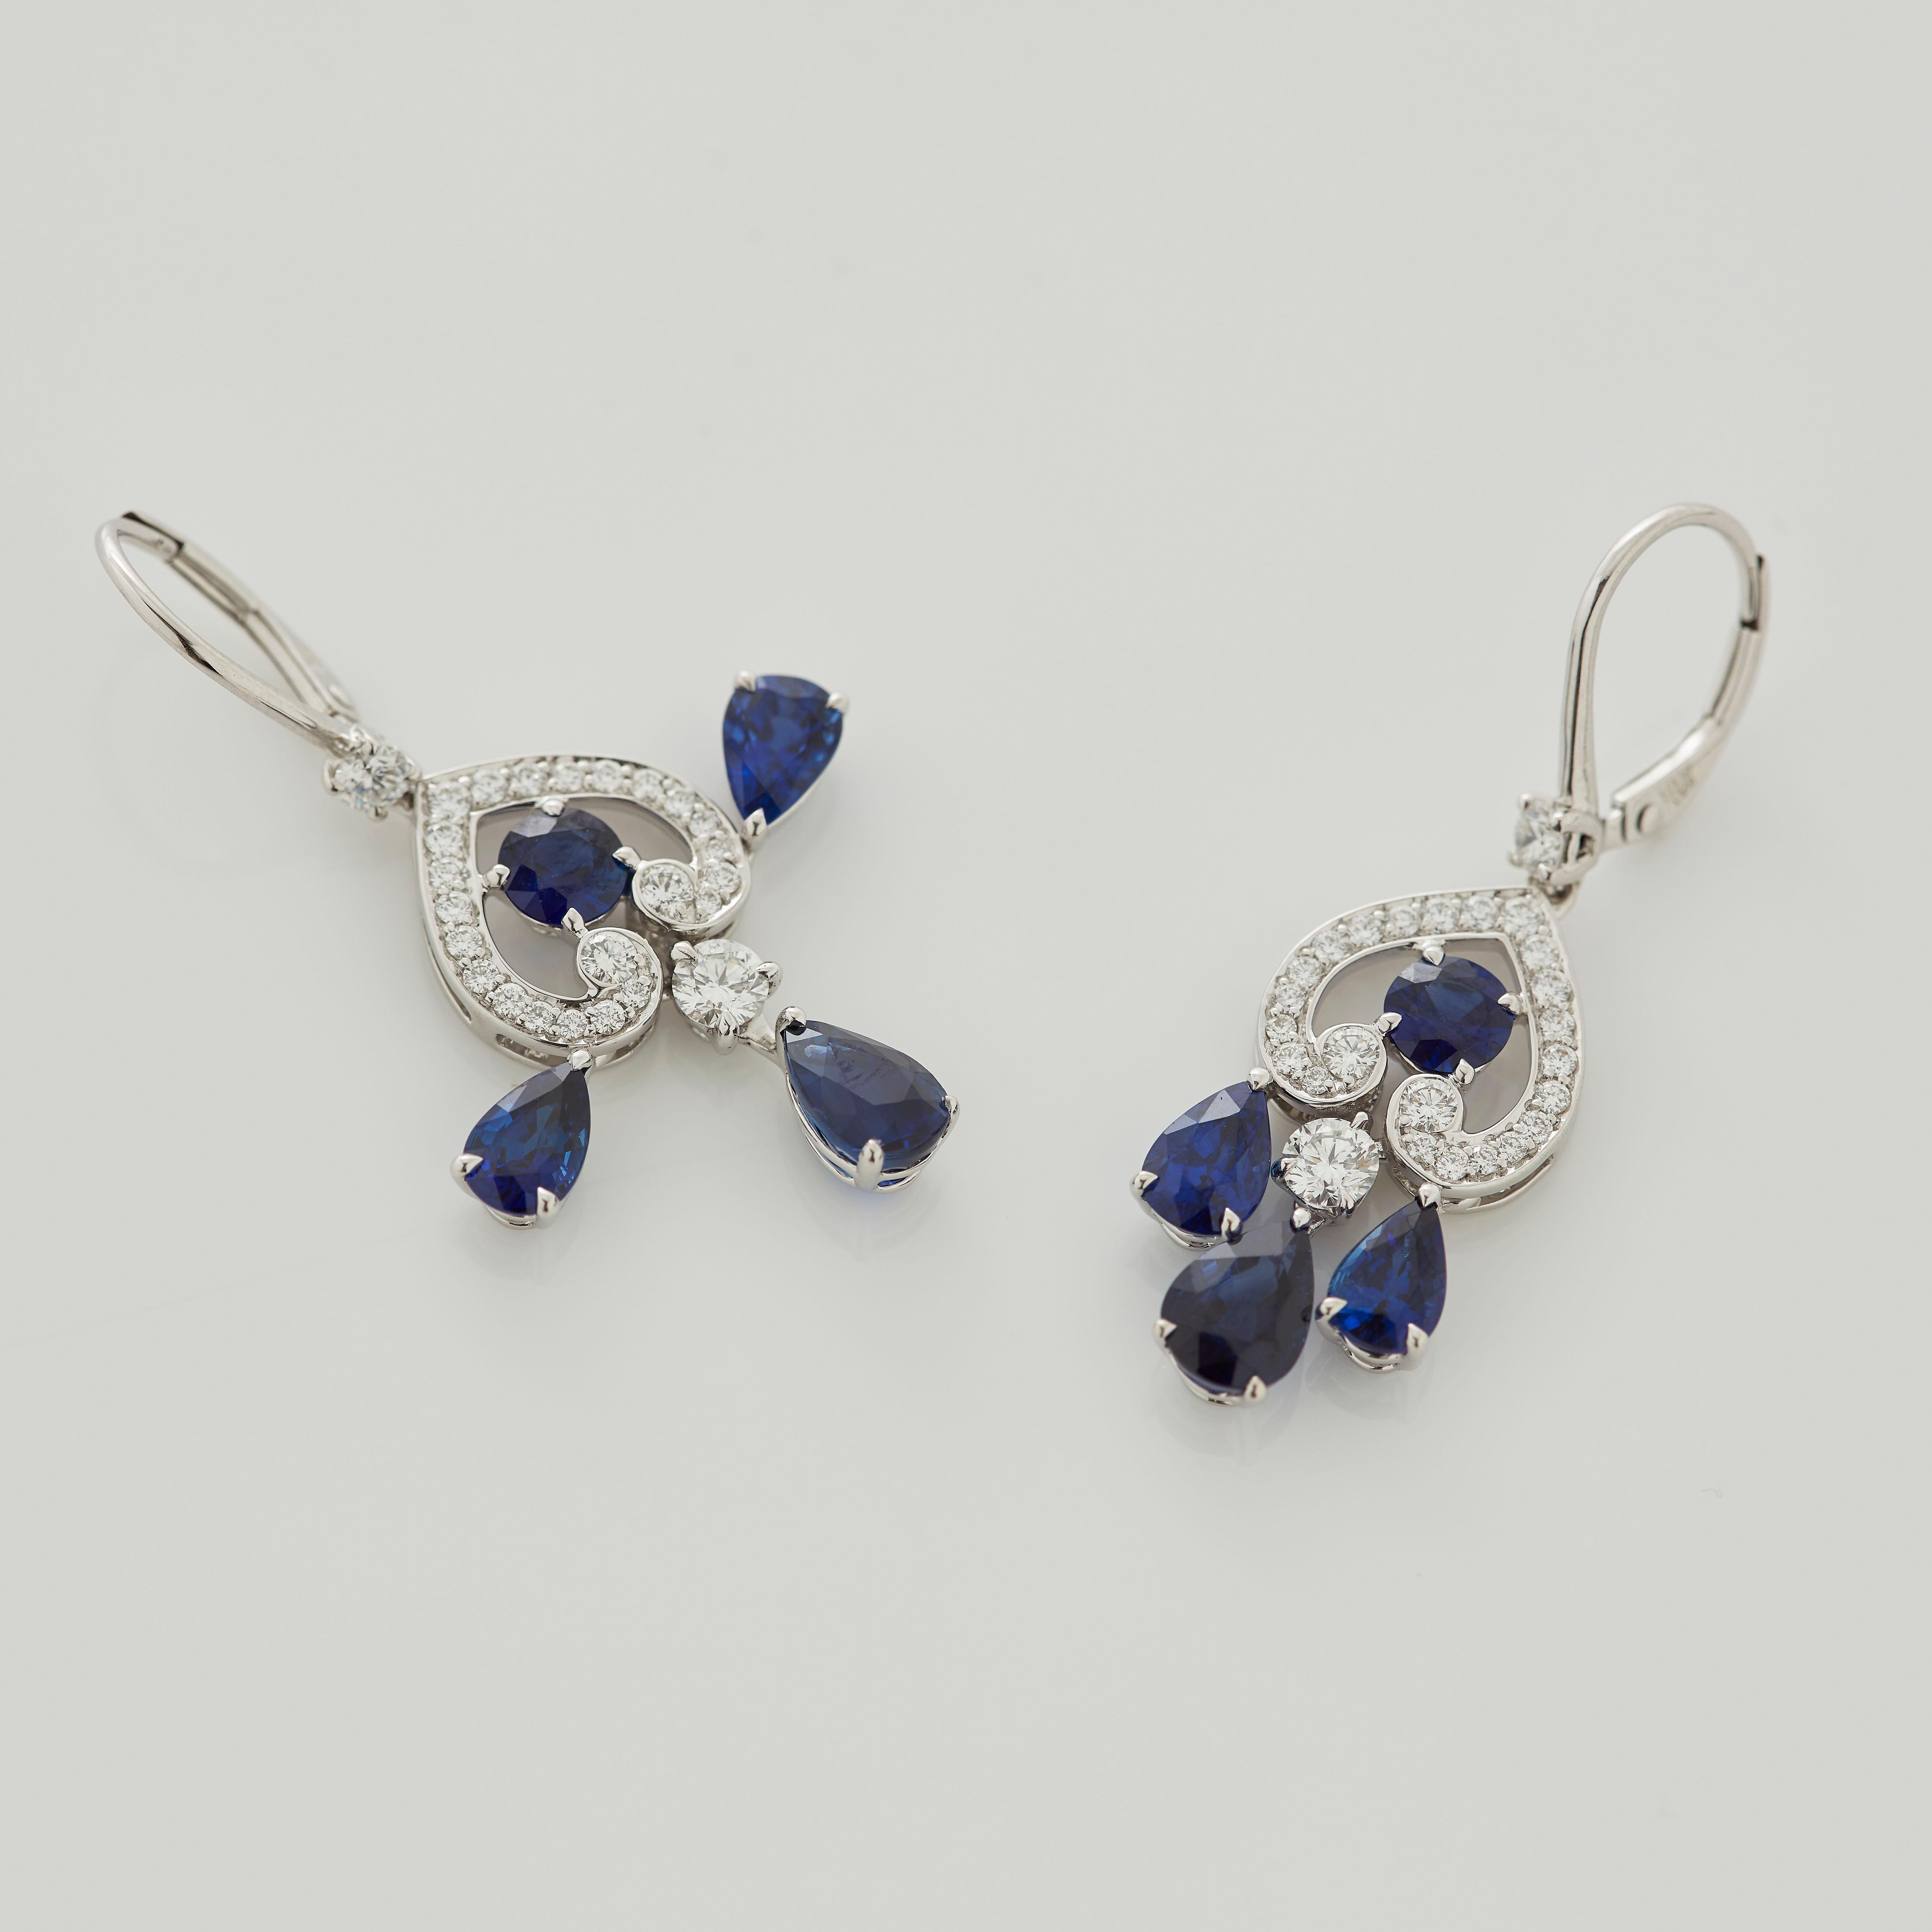 Garrard 'Regal' 18 Karat White Gold Diamond and Blue Sapphire Drop Earrings In New Condition For Sale In London, London